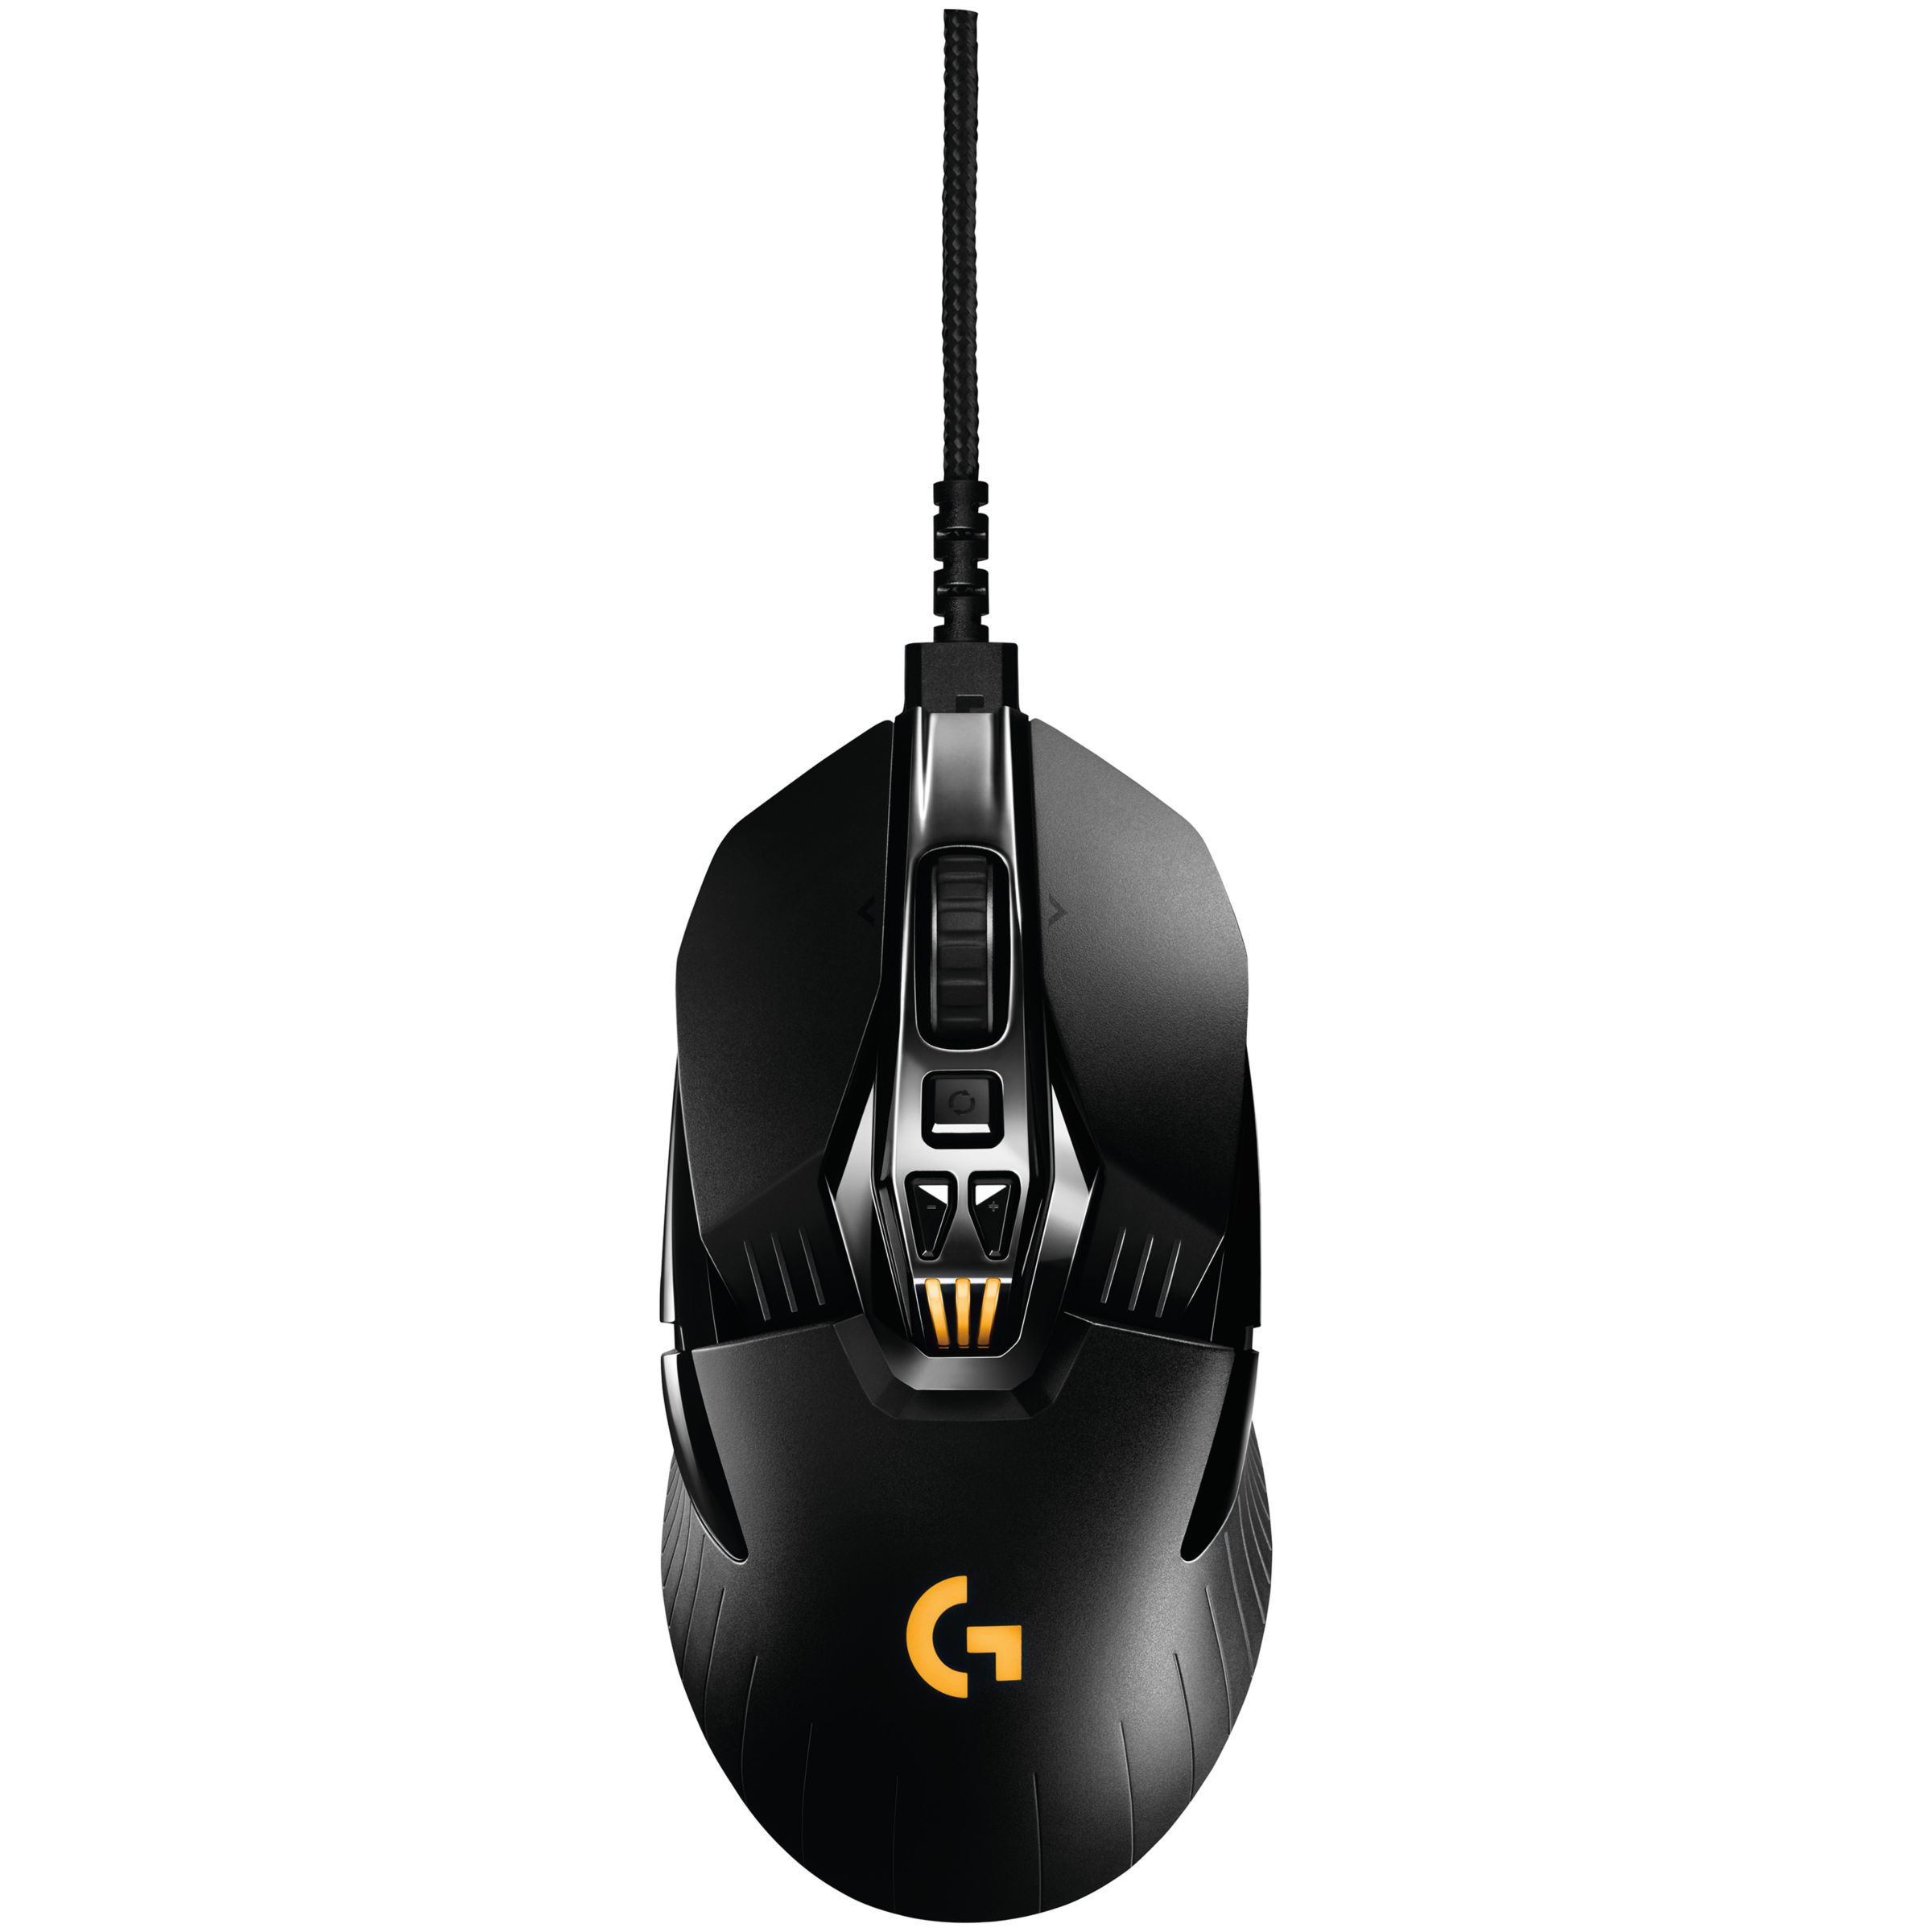 Logitech G900 Chaos Spectrum Wireless and Wired Mouse